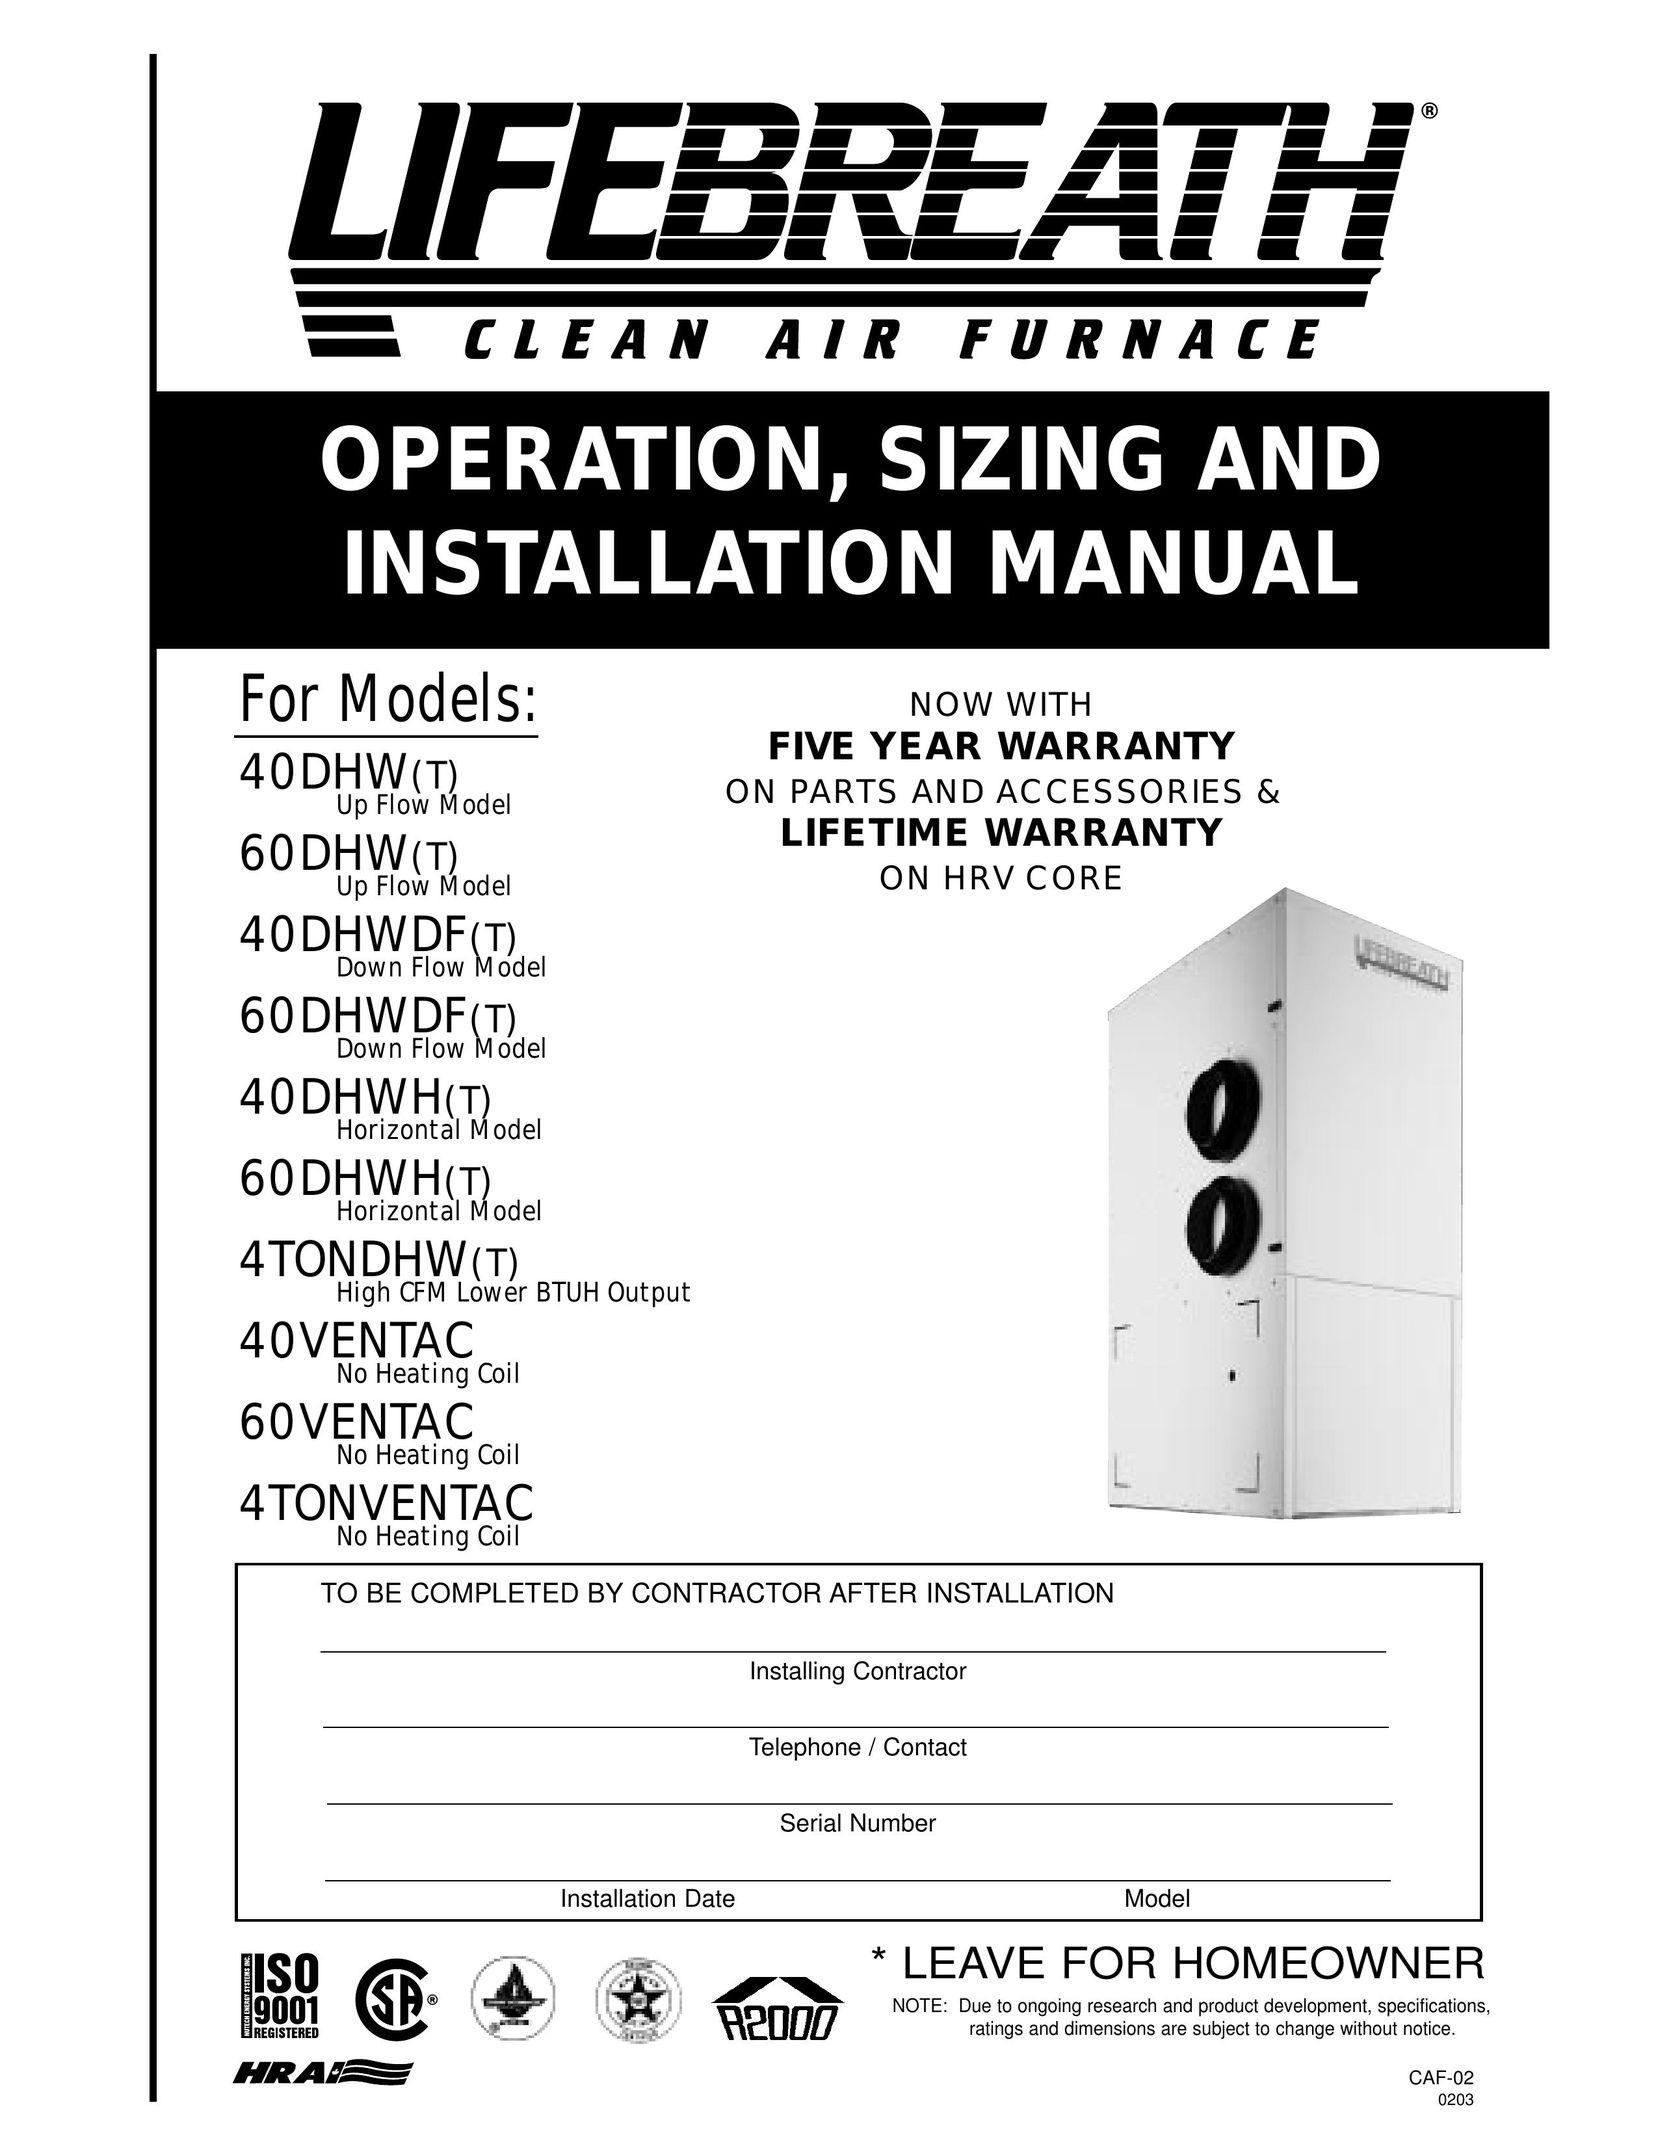 Lifebreath 60DHWH(T) Thermostat User Manual